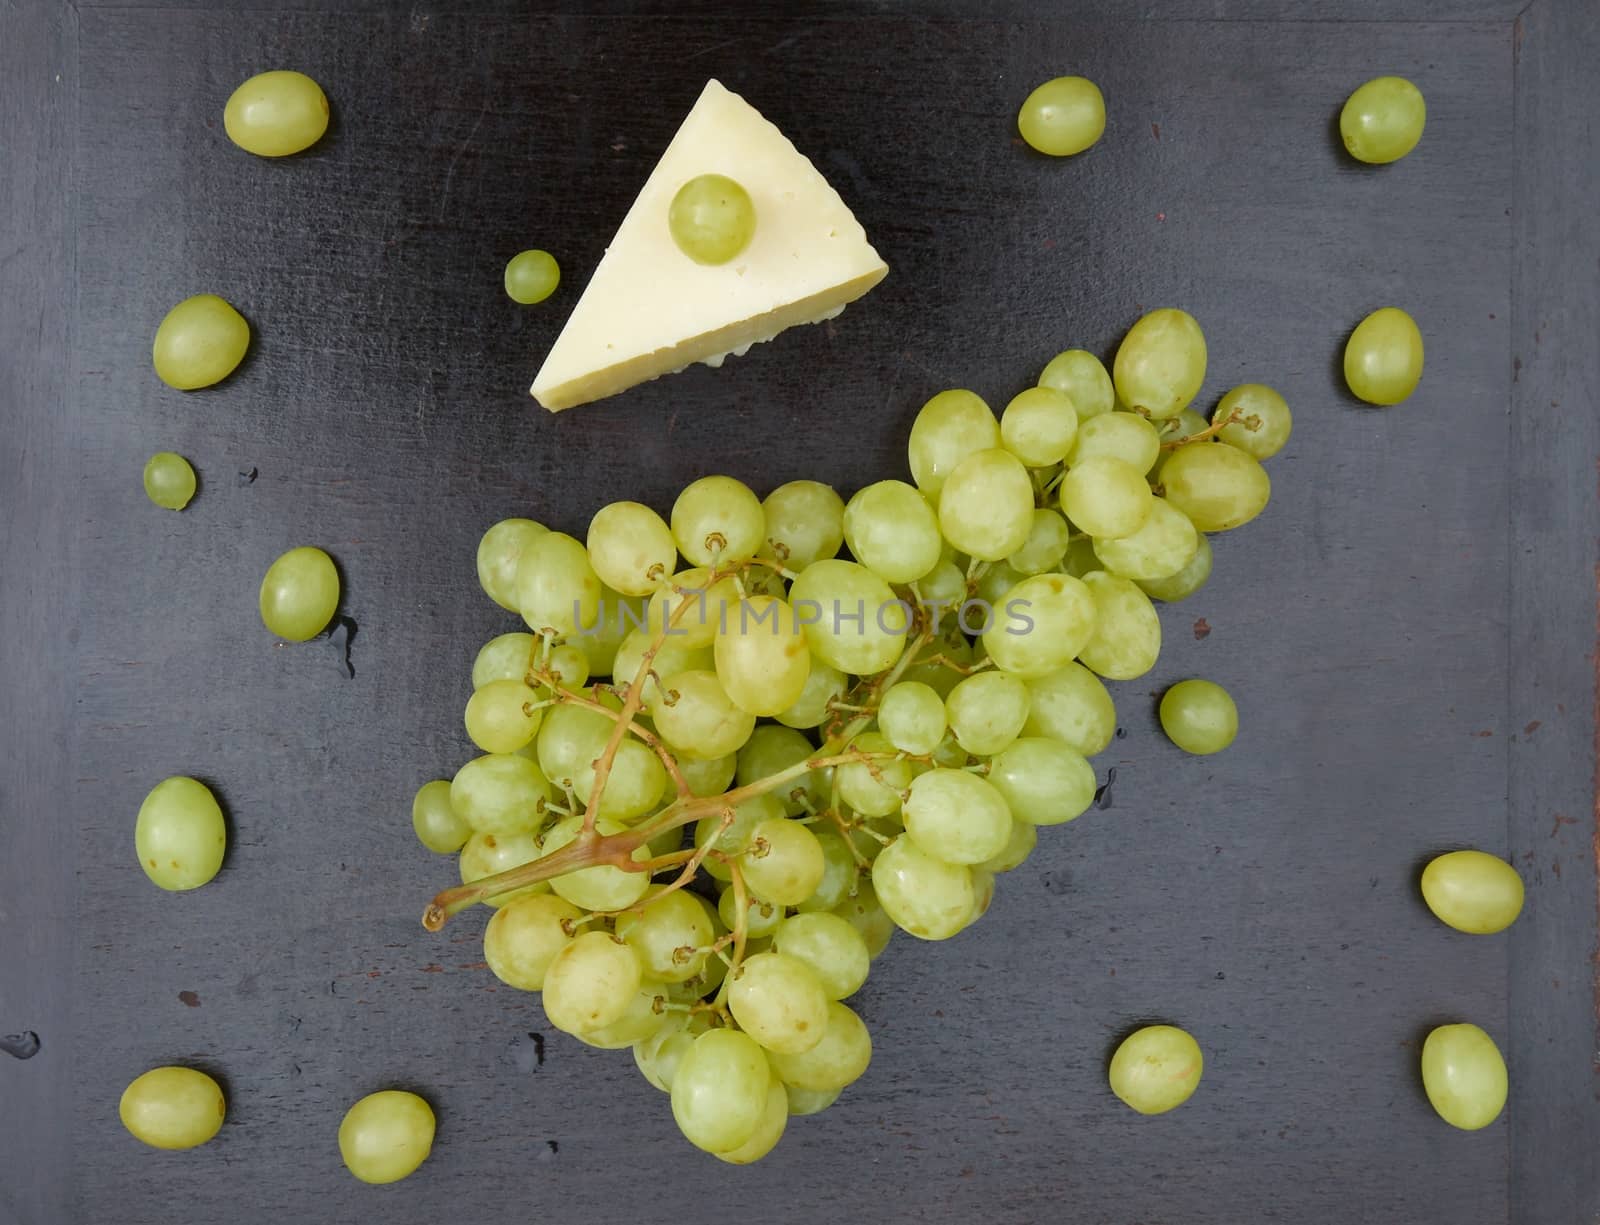 A bunch of white seedless grape and a piece of cheese on the old wooden surface. Top view. Background